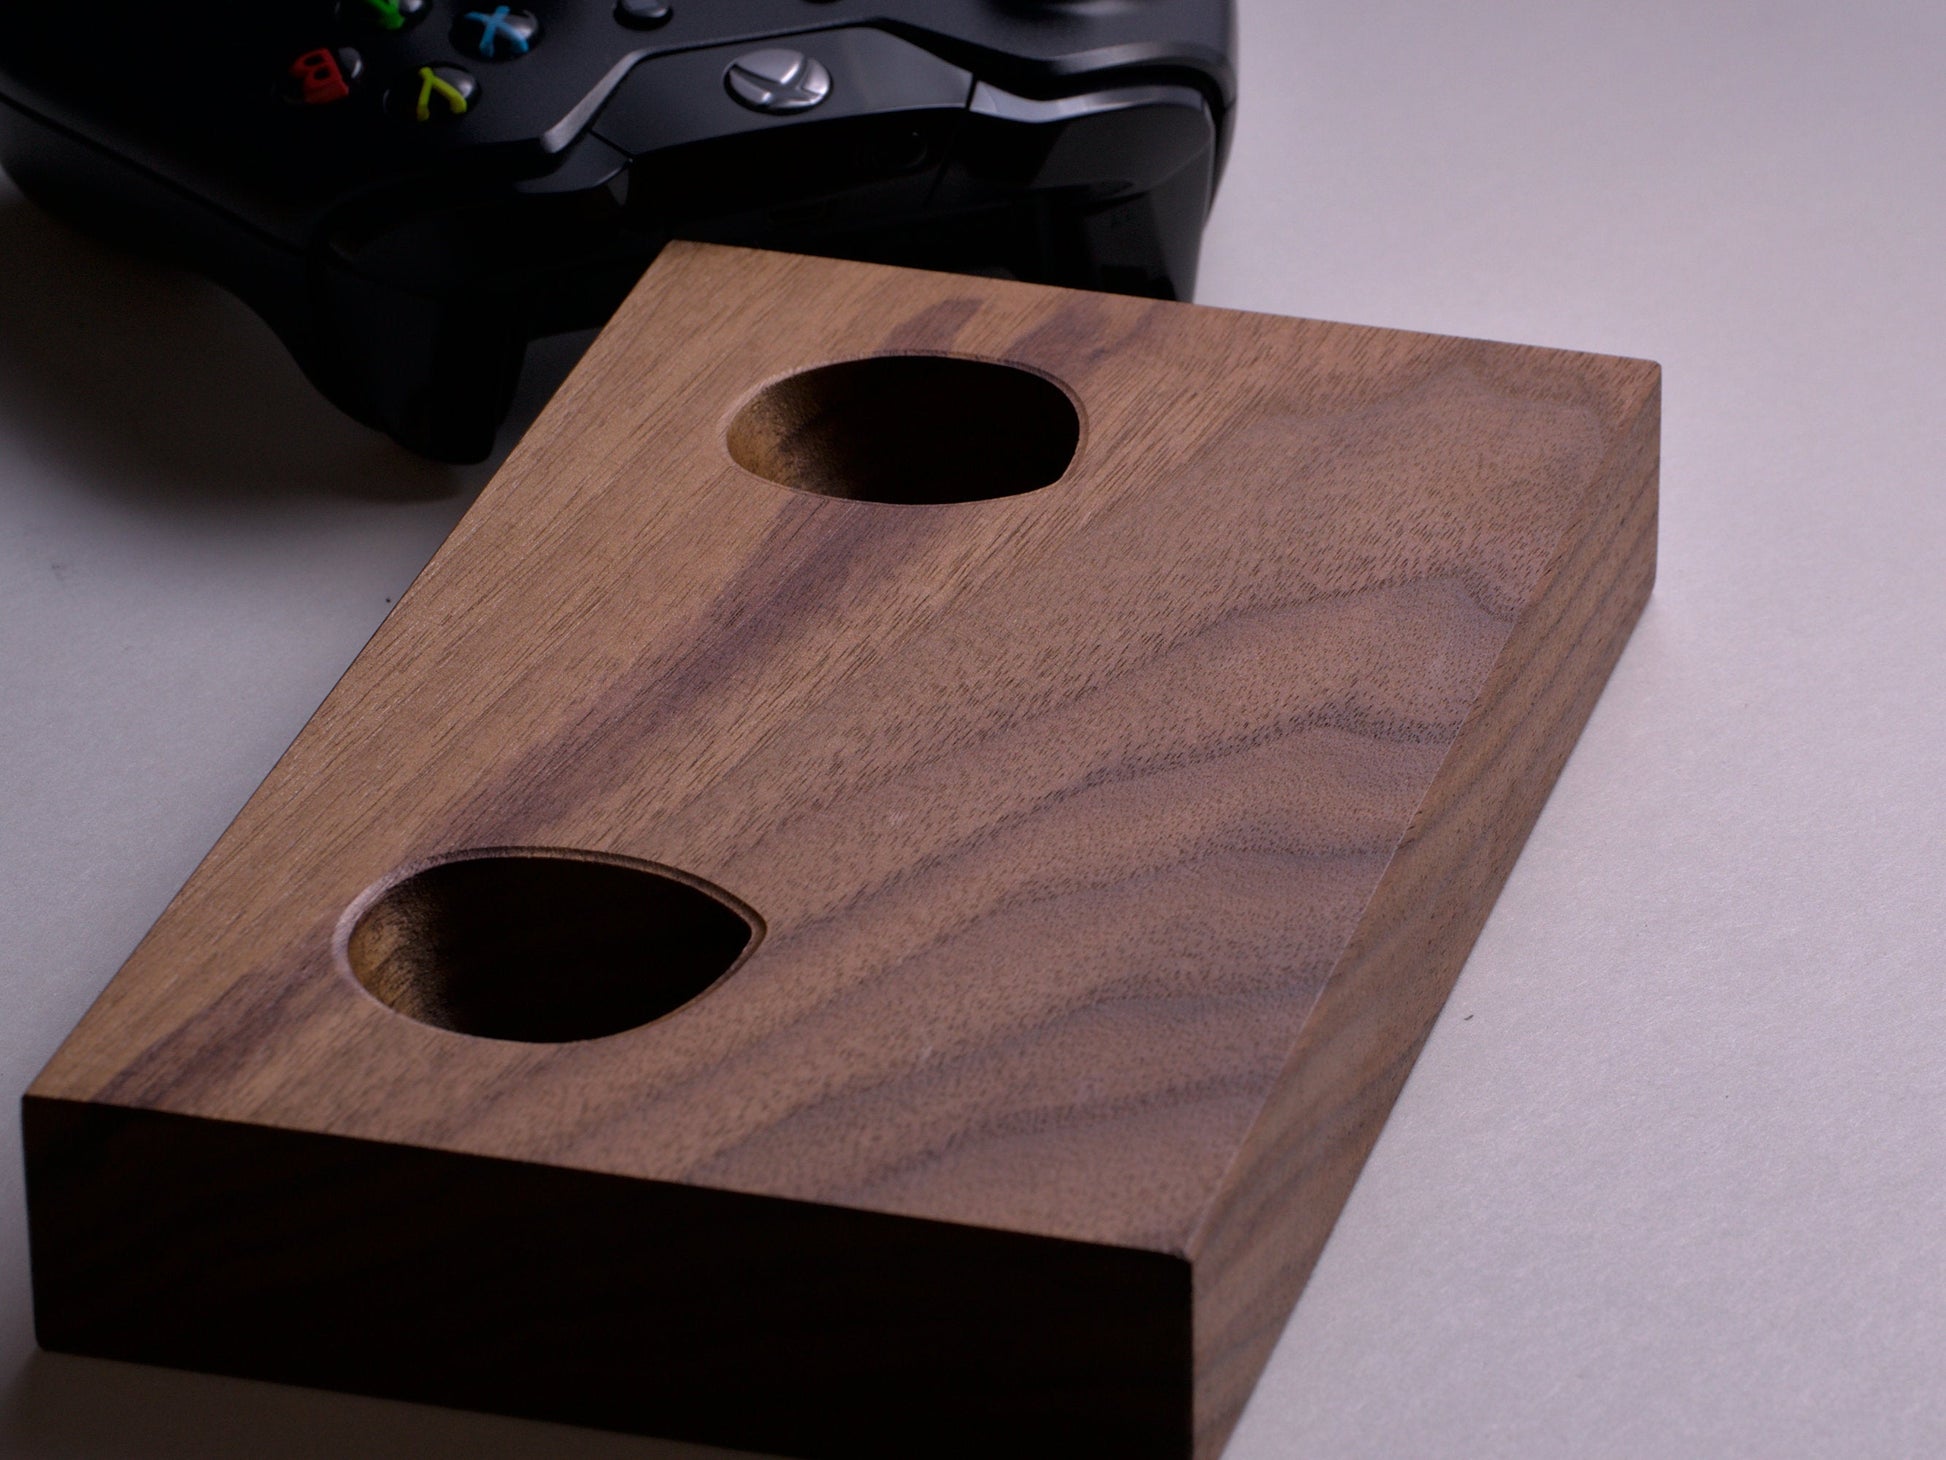 Solid wood Xbox one controller stand in Walnut